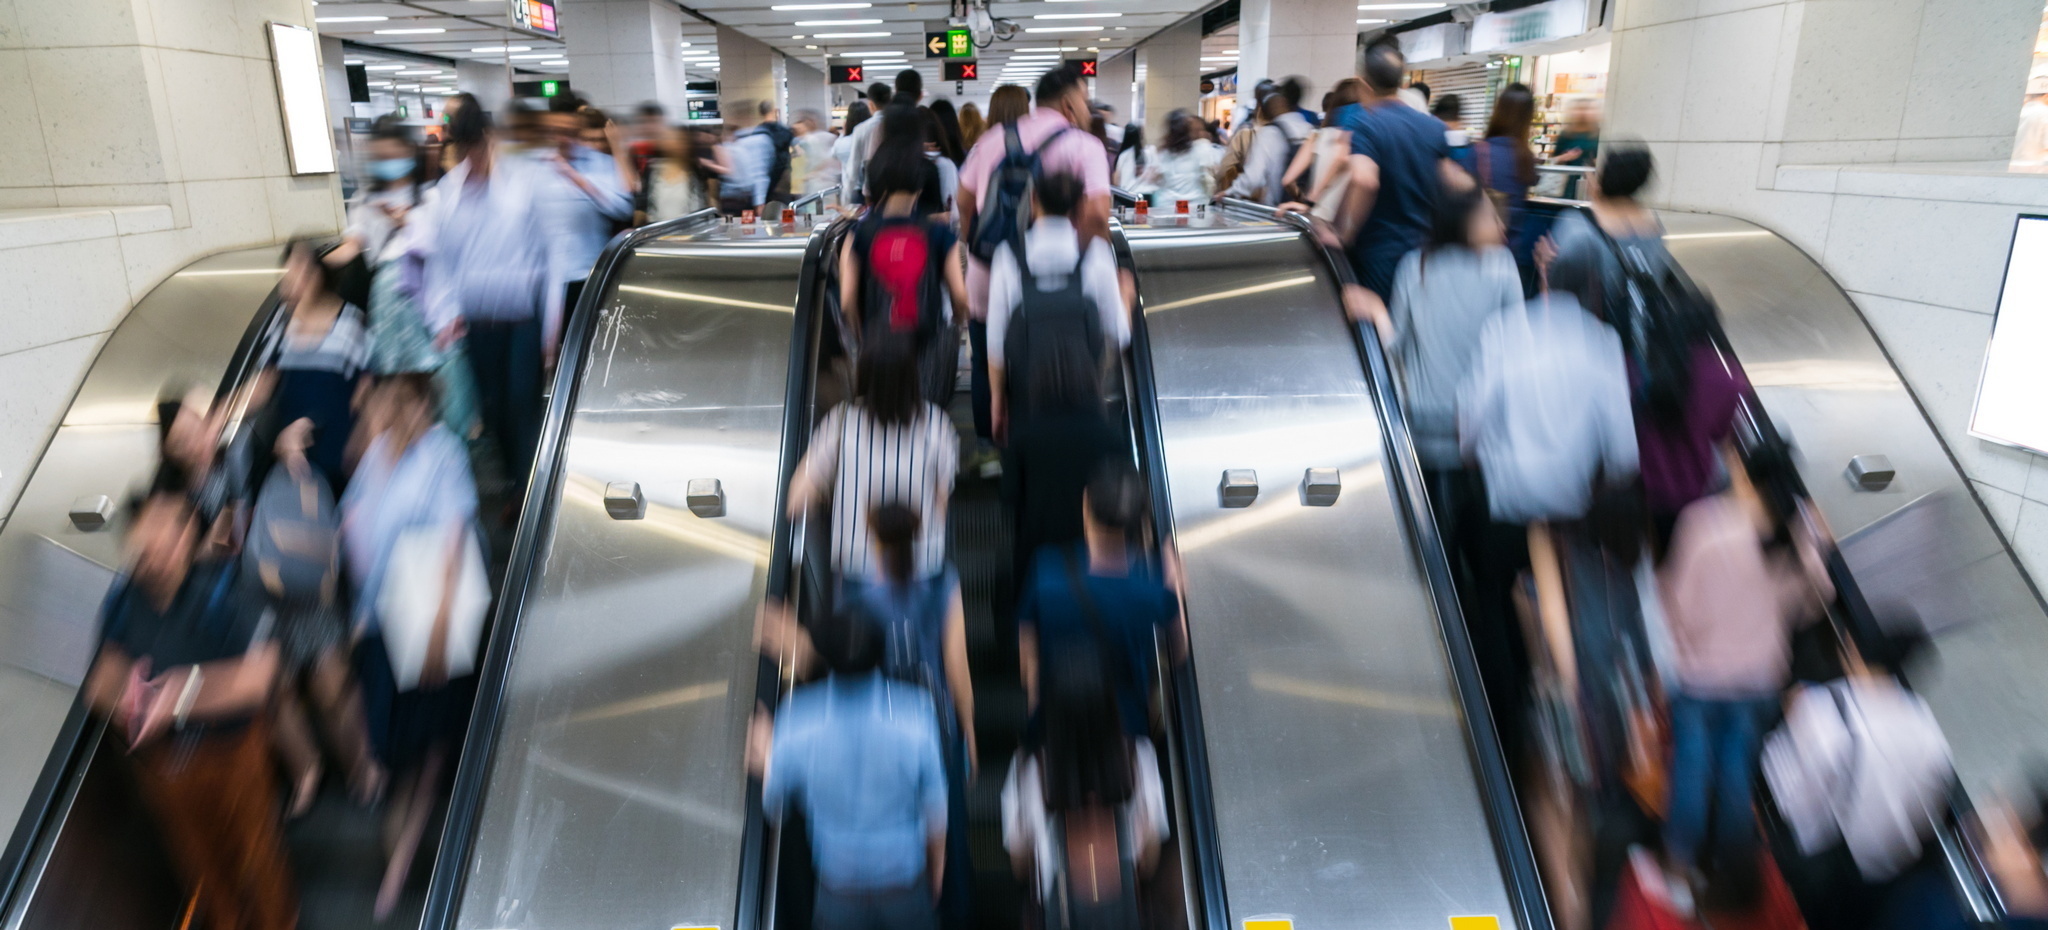 crowded escalators with lots of people (blurred).